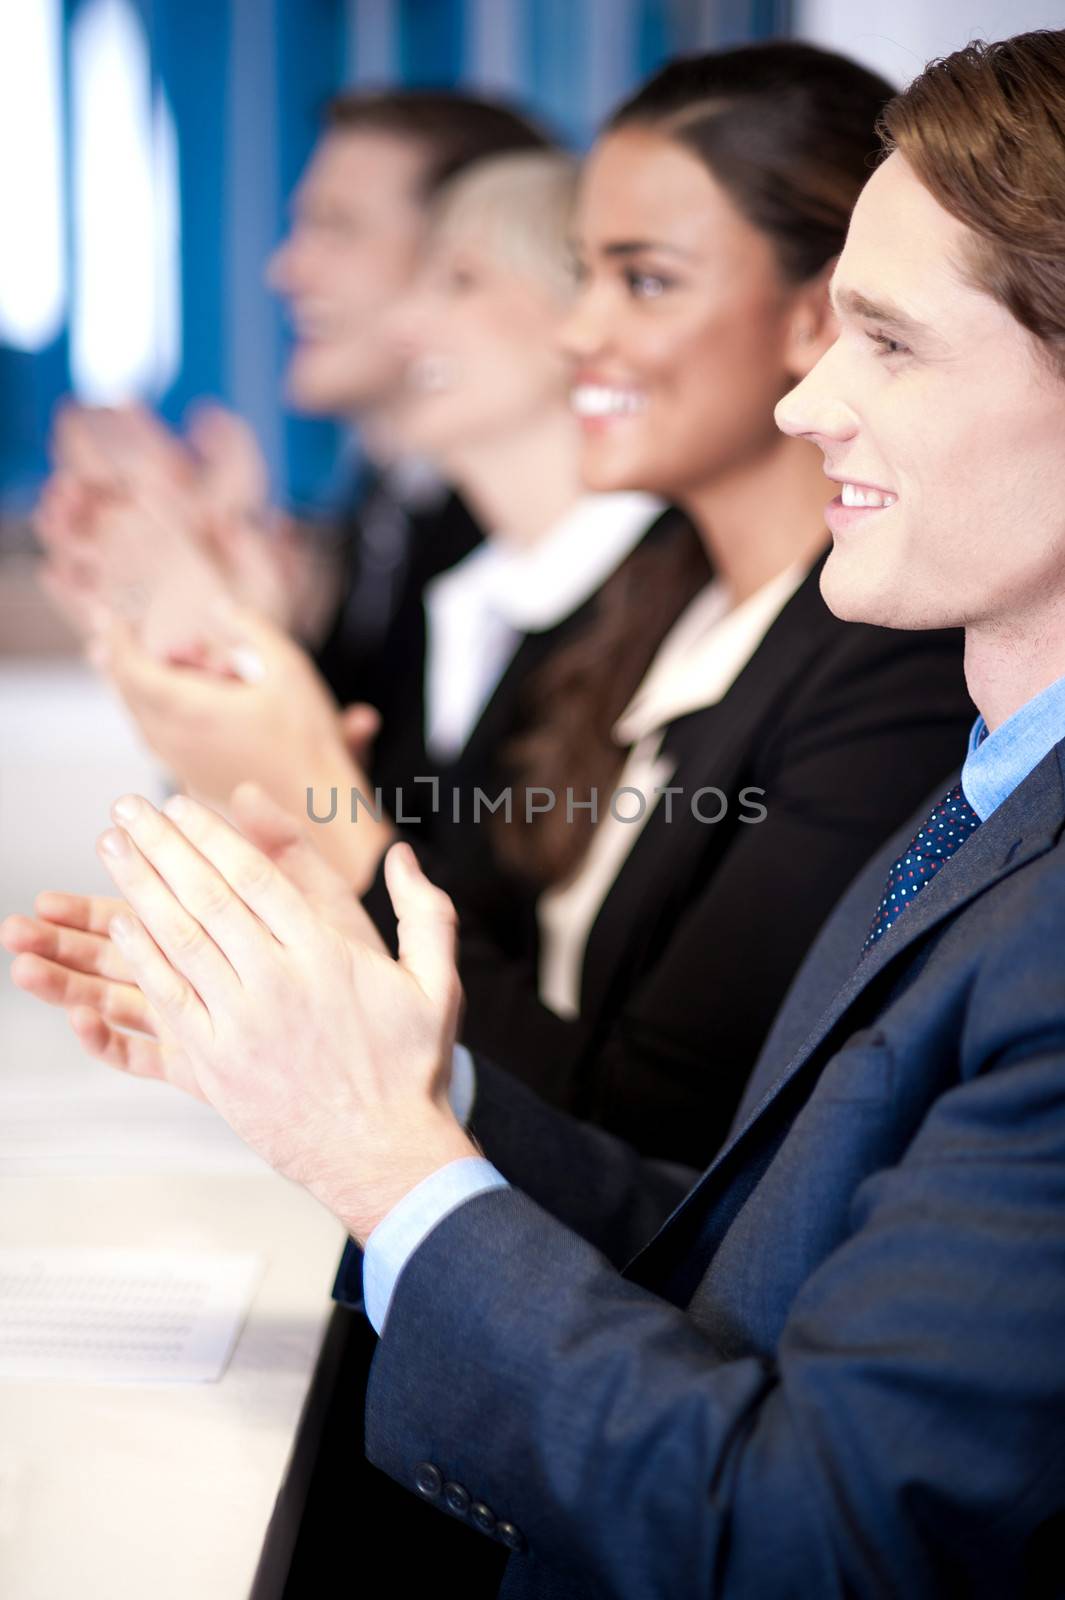 Four business people applauding during a meeting